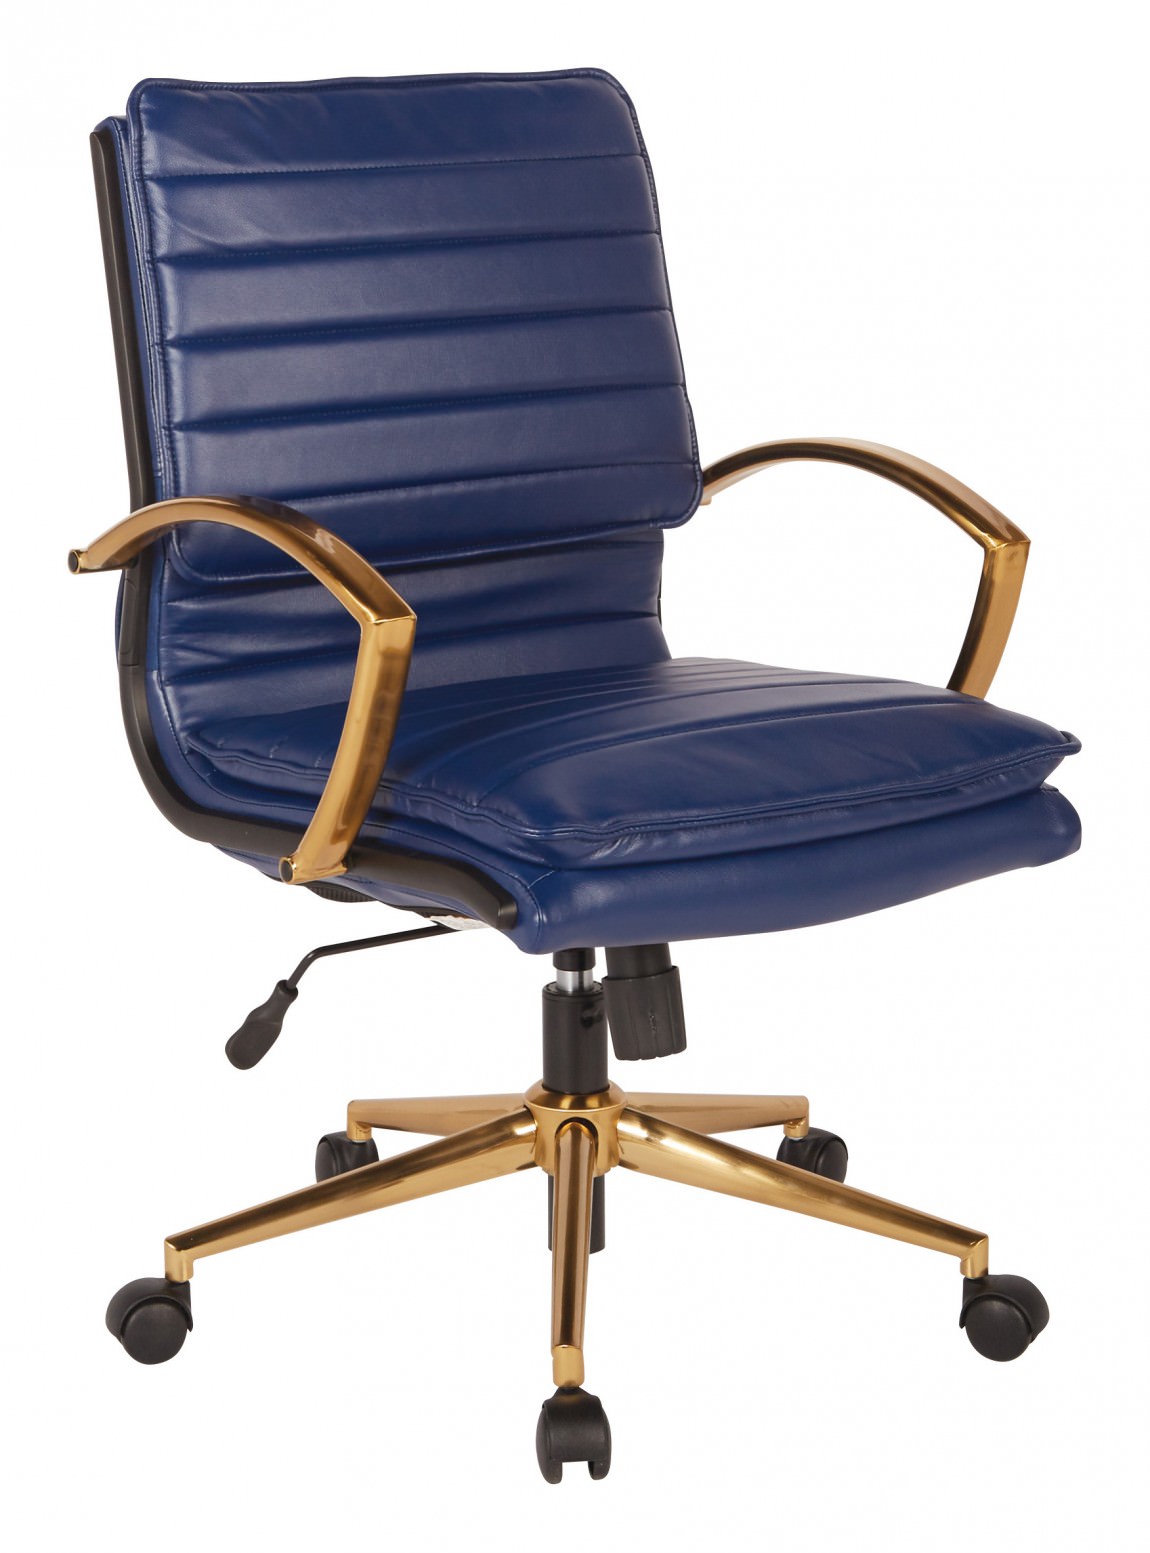 Executive Mid Back Conference Chair